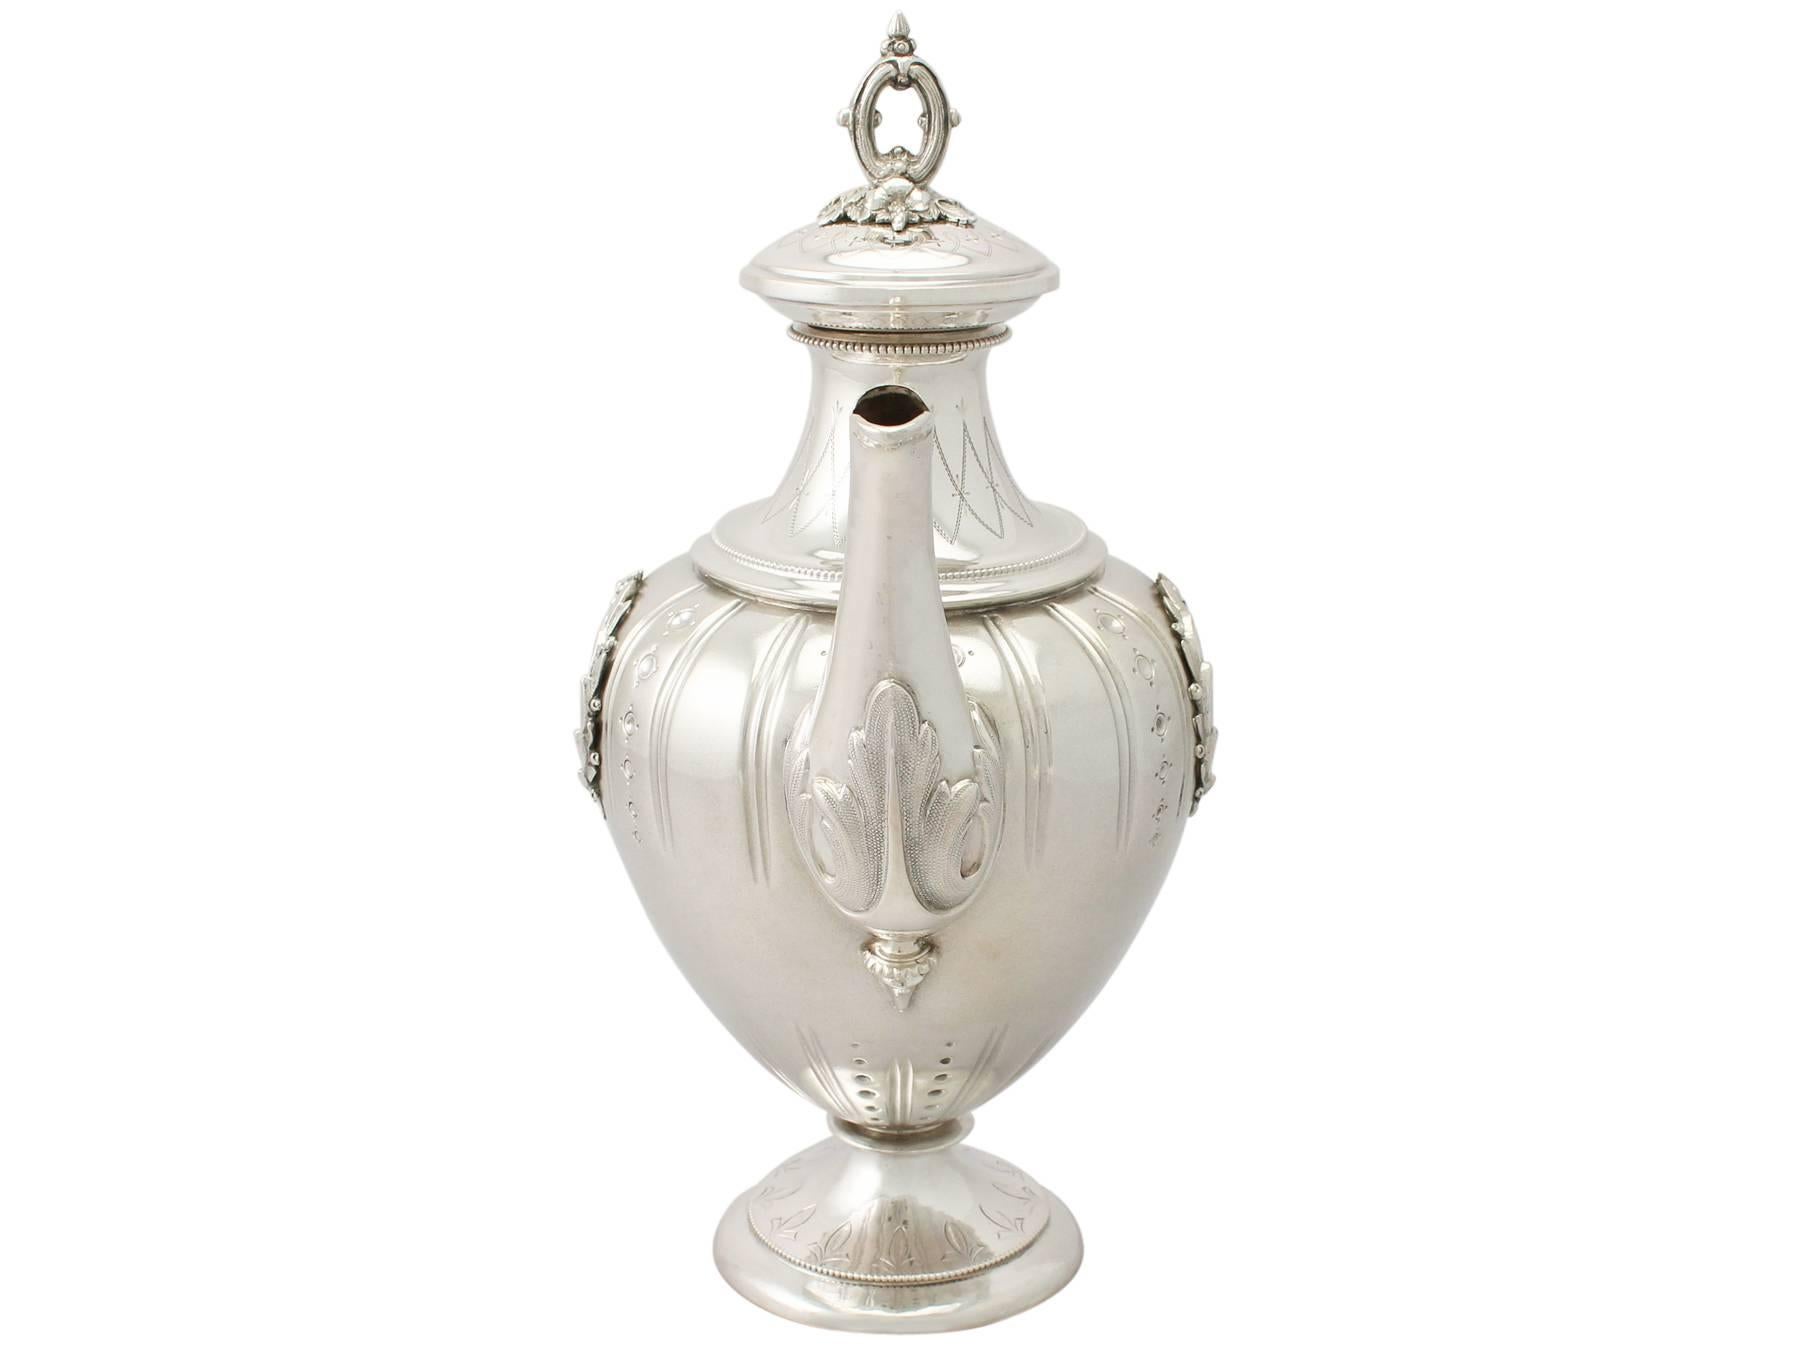 A fine and impressive antique German silver coffee pot; part of our silverware collection.

This impressive antique German silver coffee pot has an urn shaped form onto a circular spreading foot.

The surface of this fine coffee pot has a